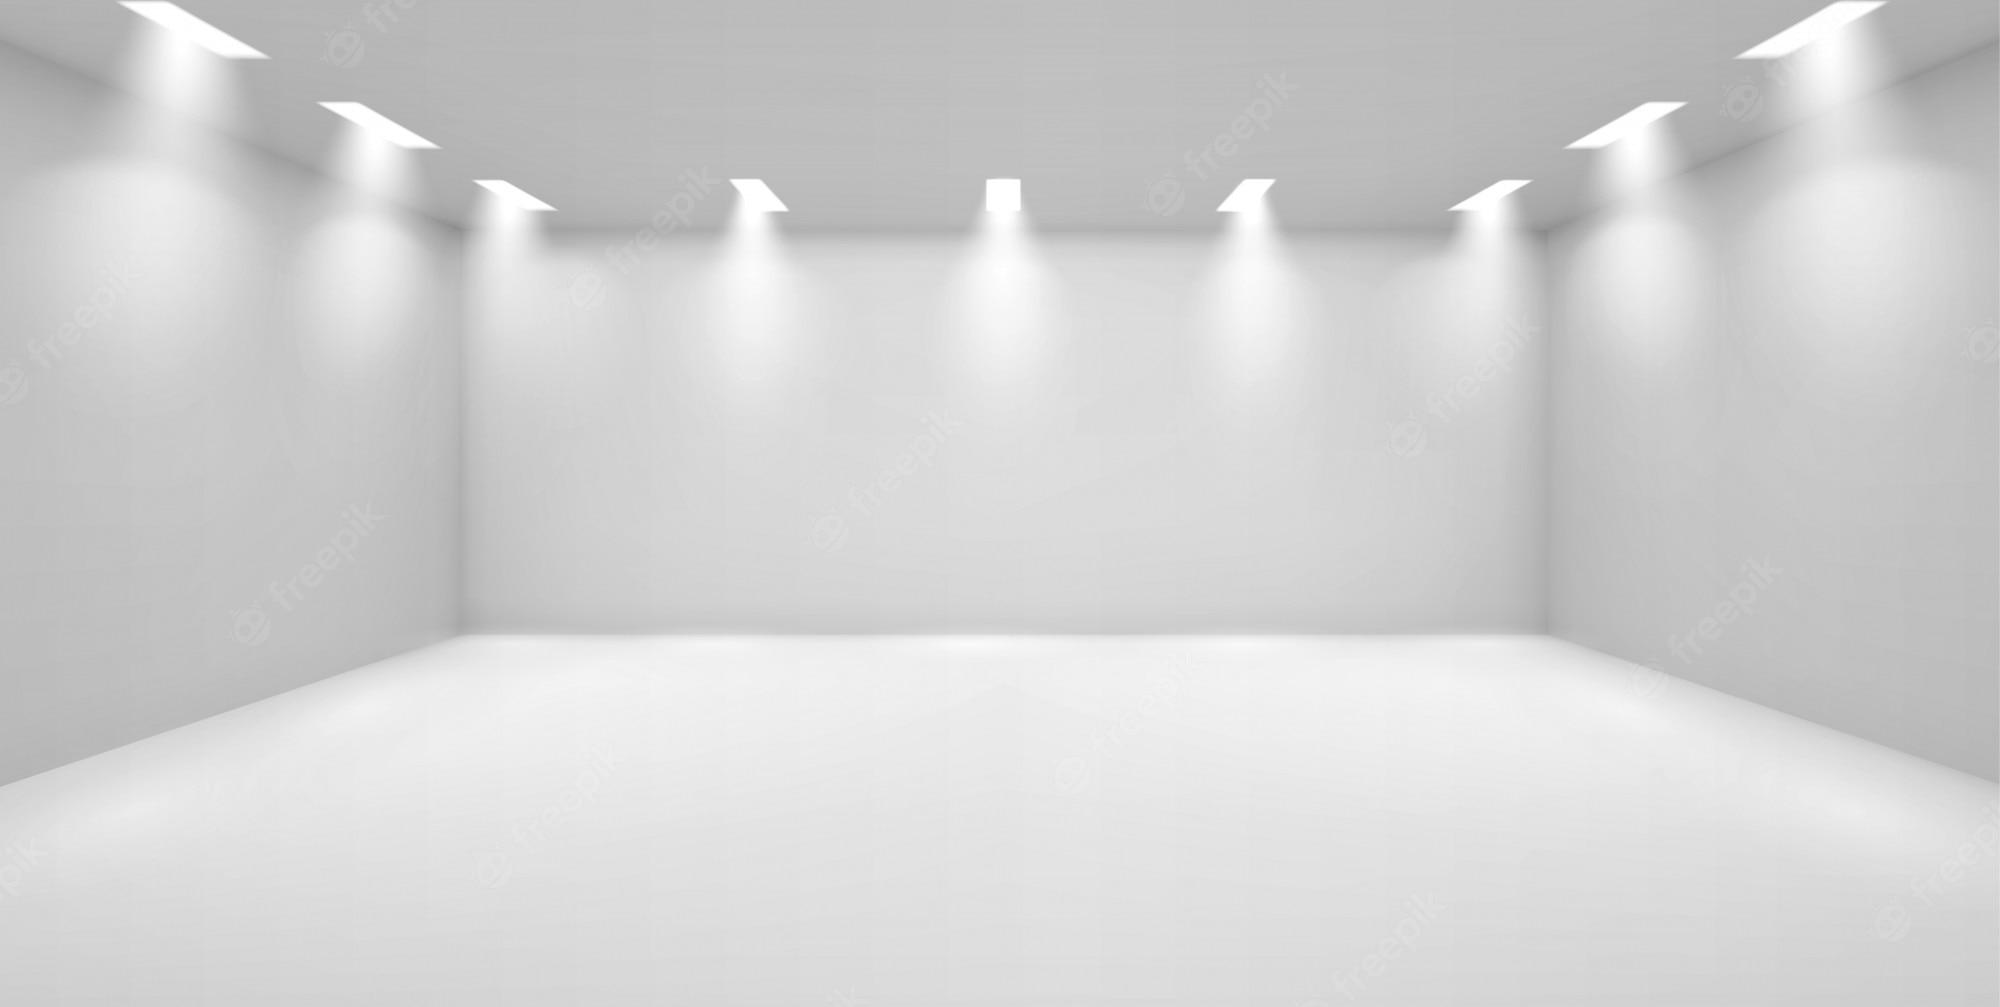 art-gallery-empty-room-with-white-walls-